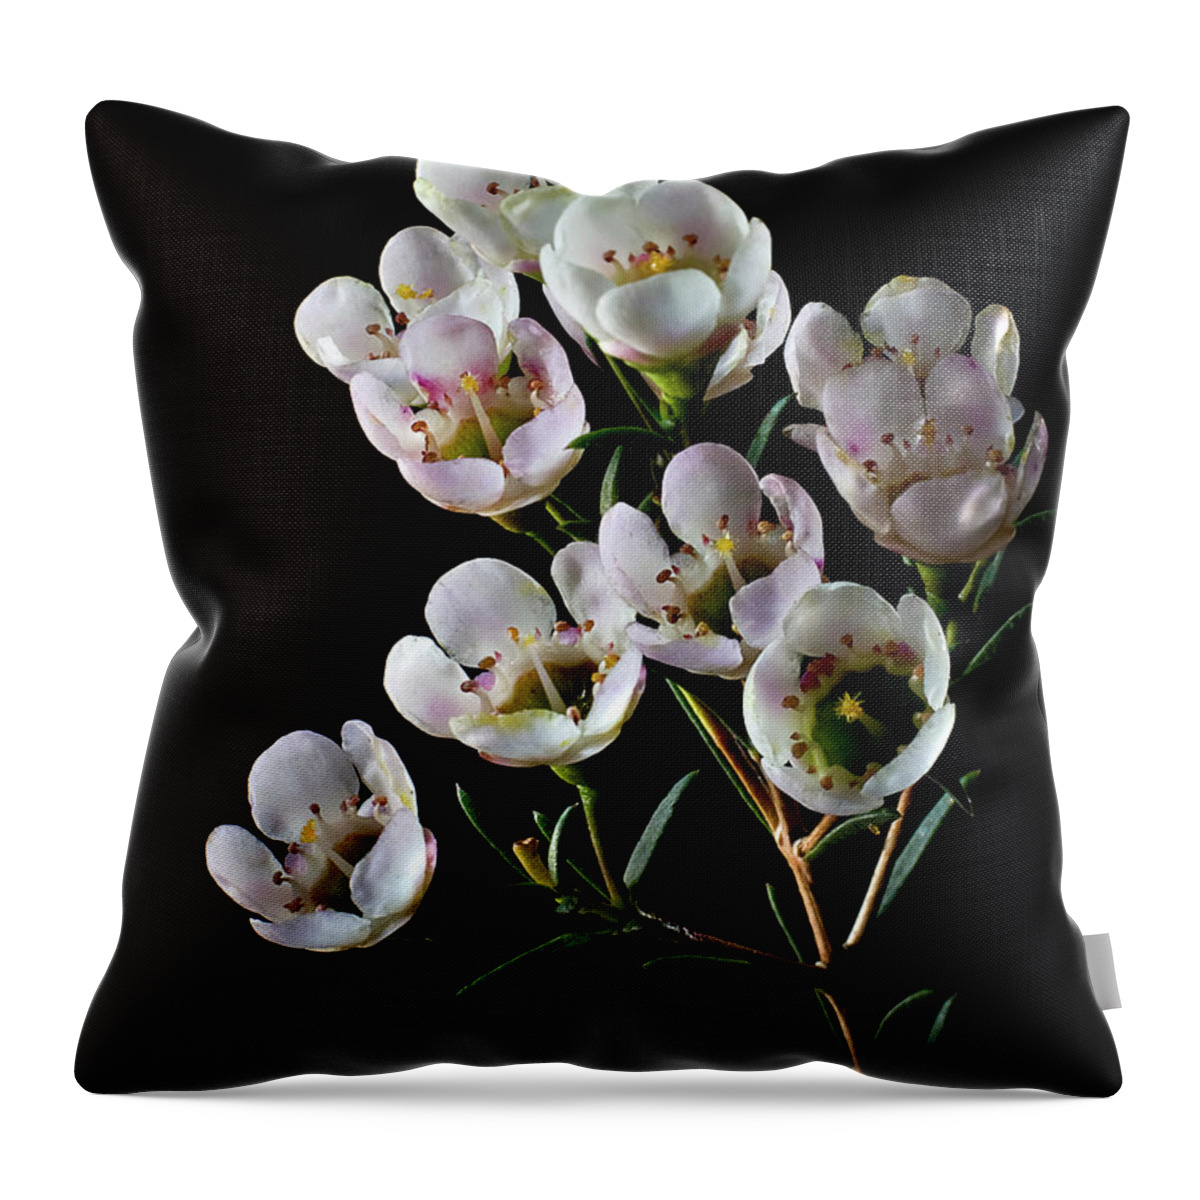 Flower Throw Pillow featuring the photograph Wax Flowers by Endre Balogh